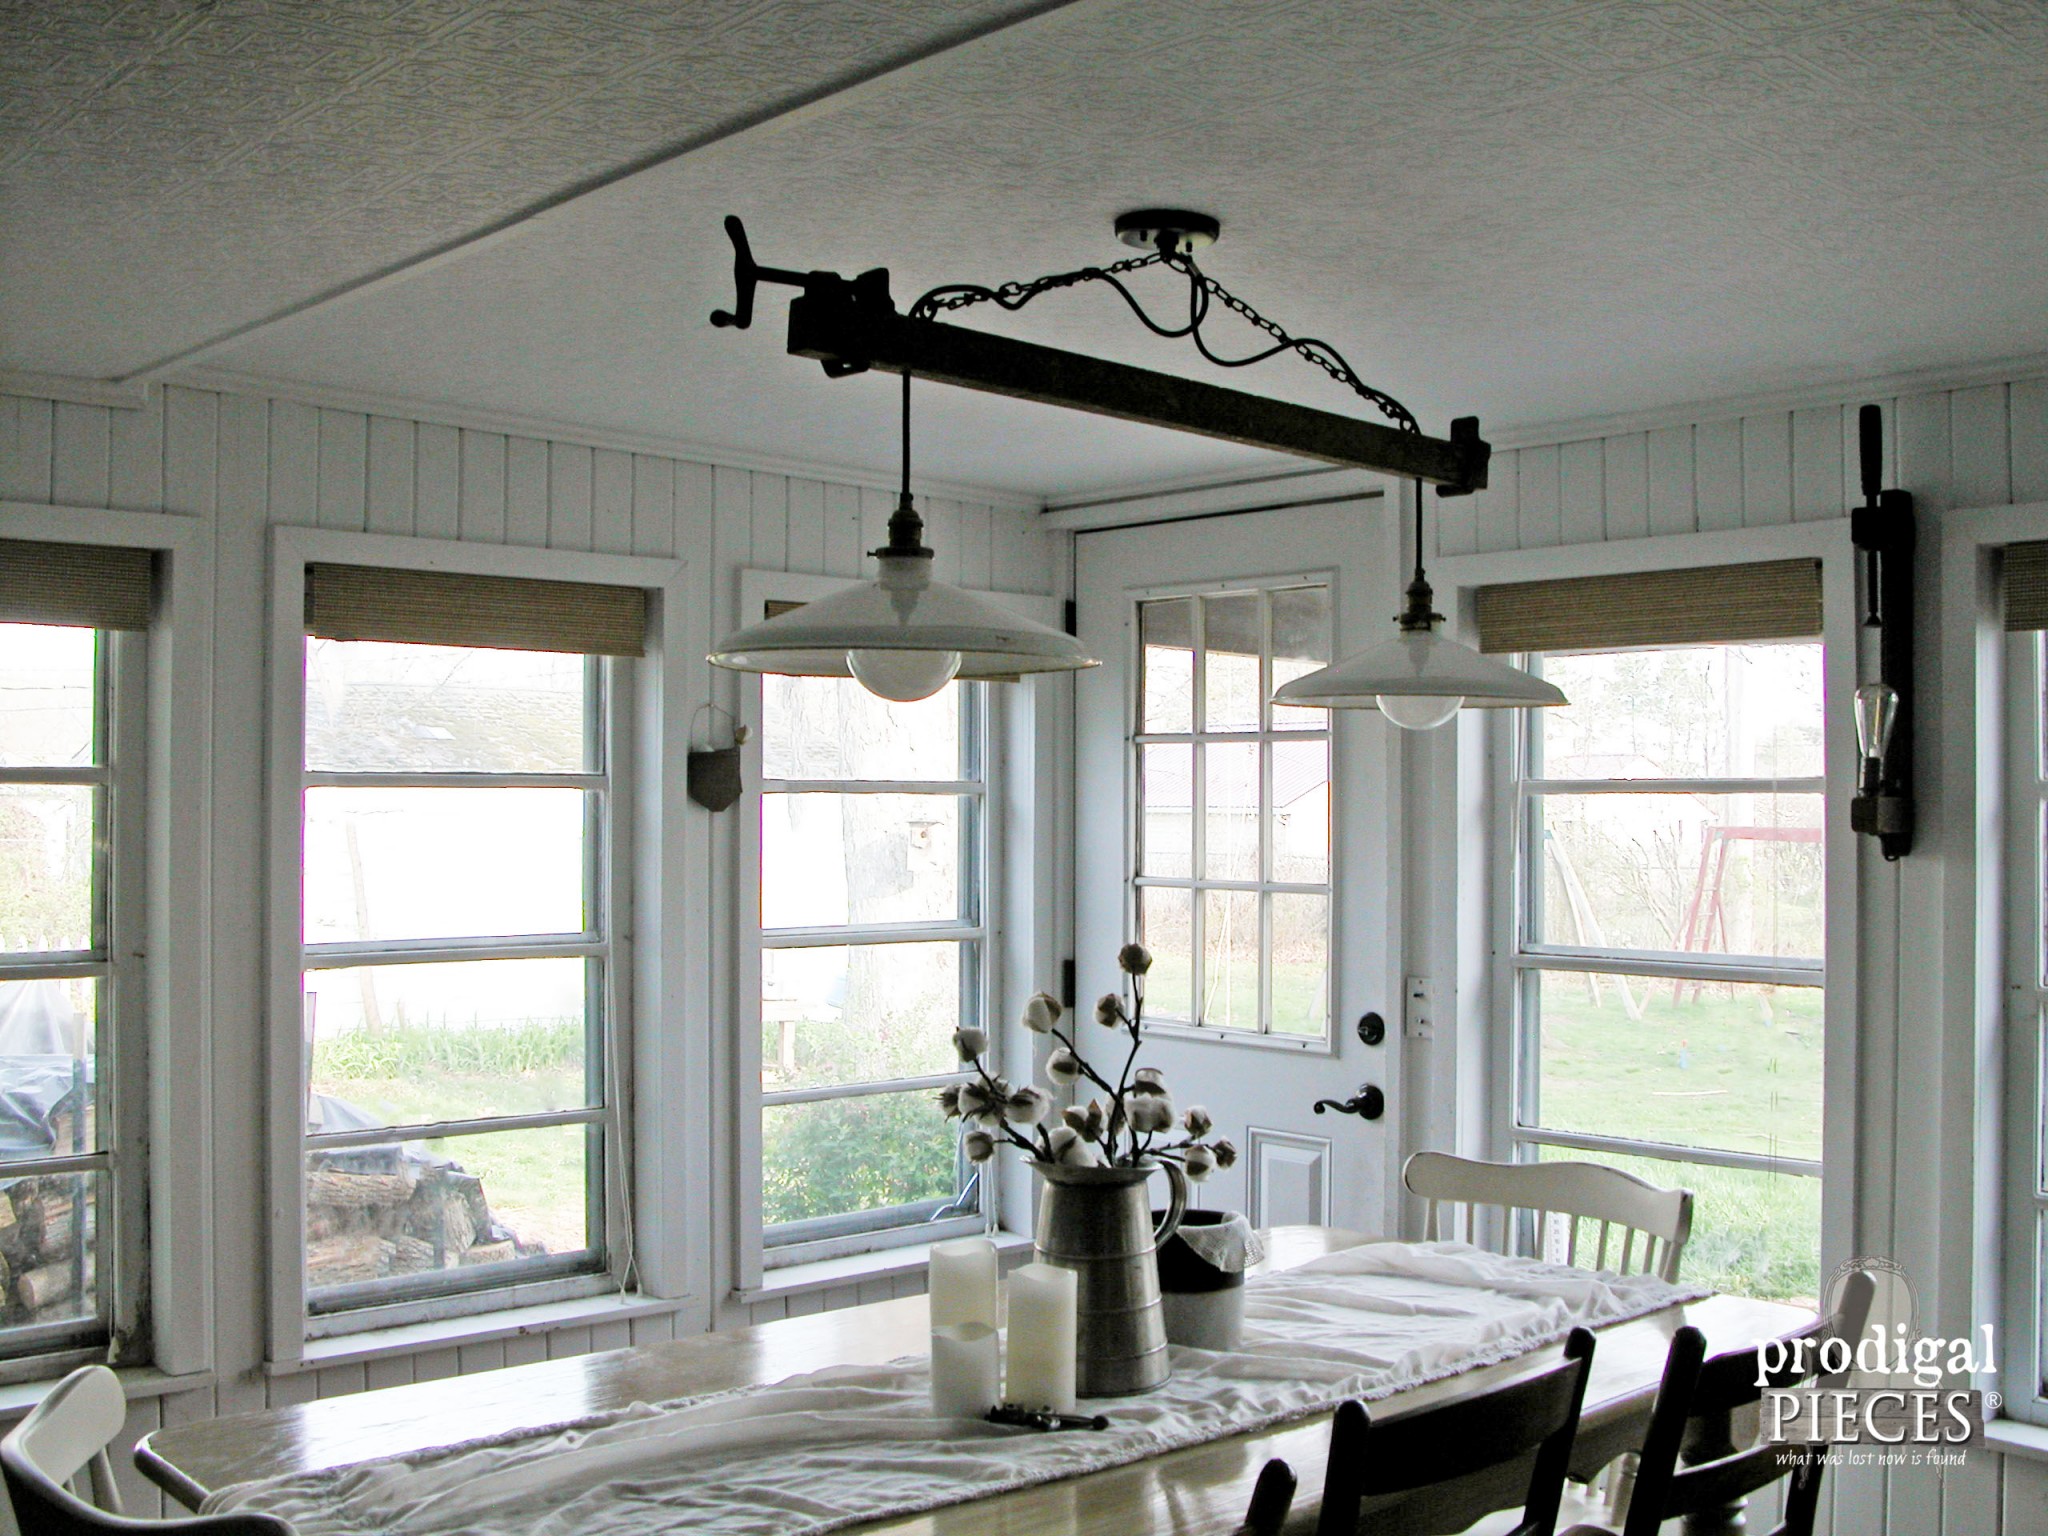 Reclaimed and Repurposed Farmhouse Lighting by Prodigal Pieces | www.prodigalpieces.com